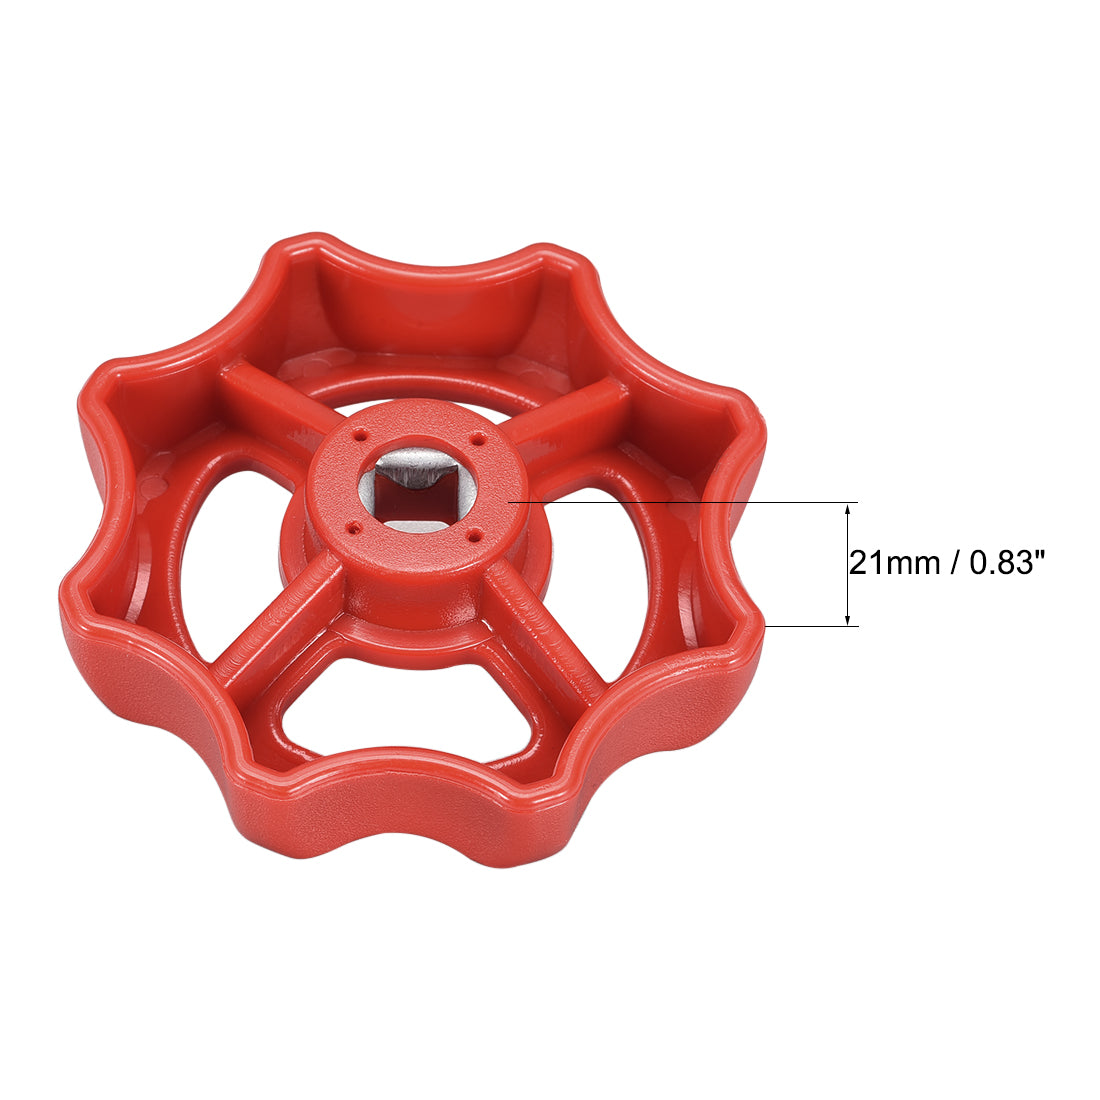 uxcell Uxcell Round Wheel Handle, Square Broach 8x8mm, Wheel OD 74mm ABS Red 1Pcs